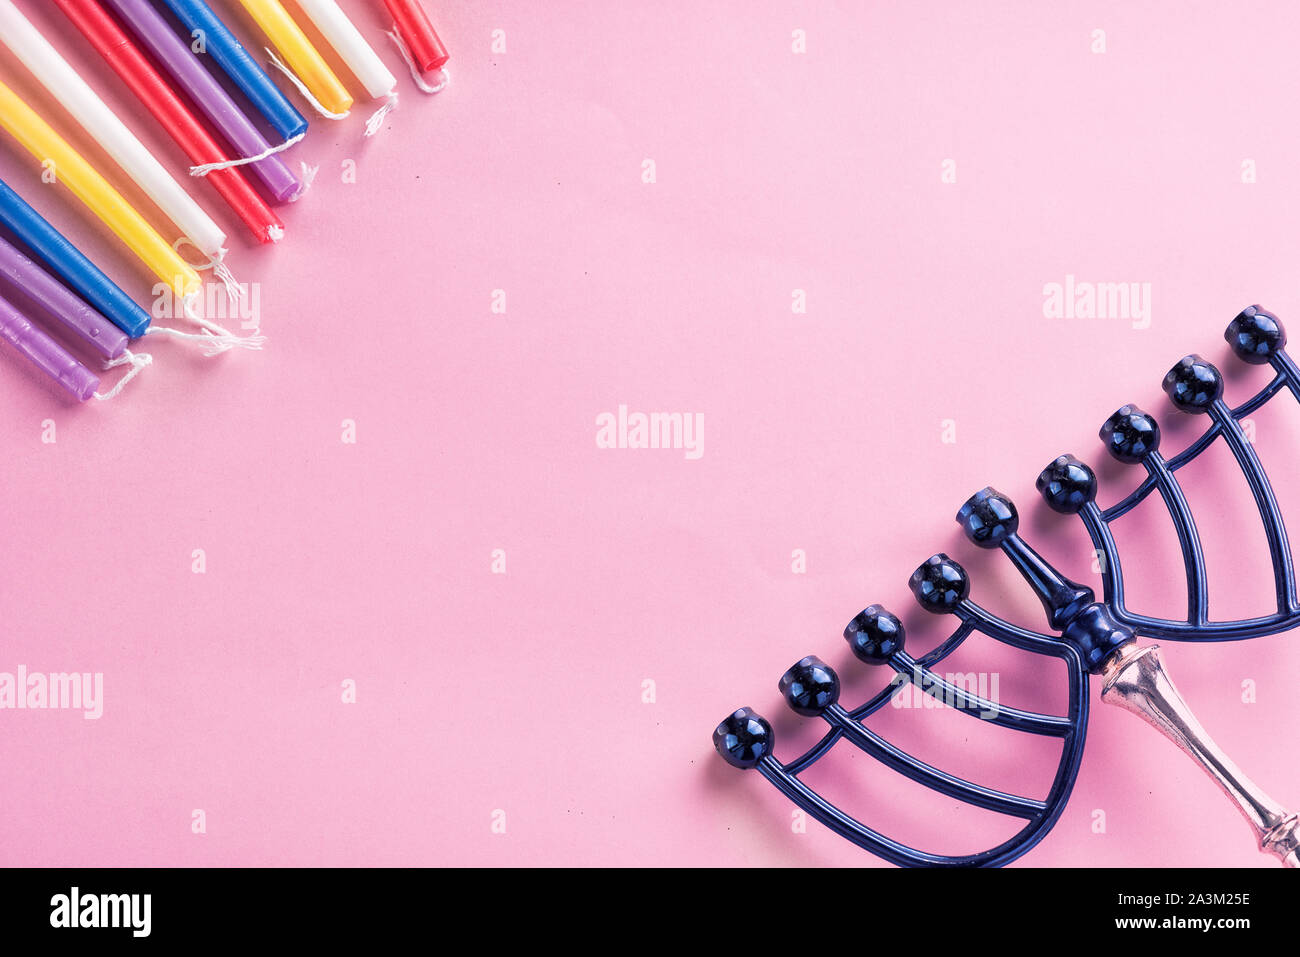 Image of jewish holiday Hanukkah colorful candles, menorah traditional Candelabra on pink background.Flat lay.Copy space for text. Stock Photo